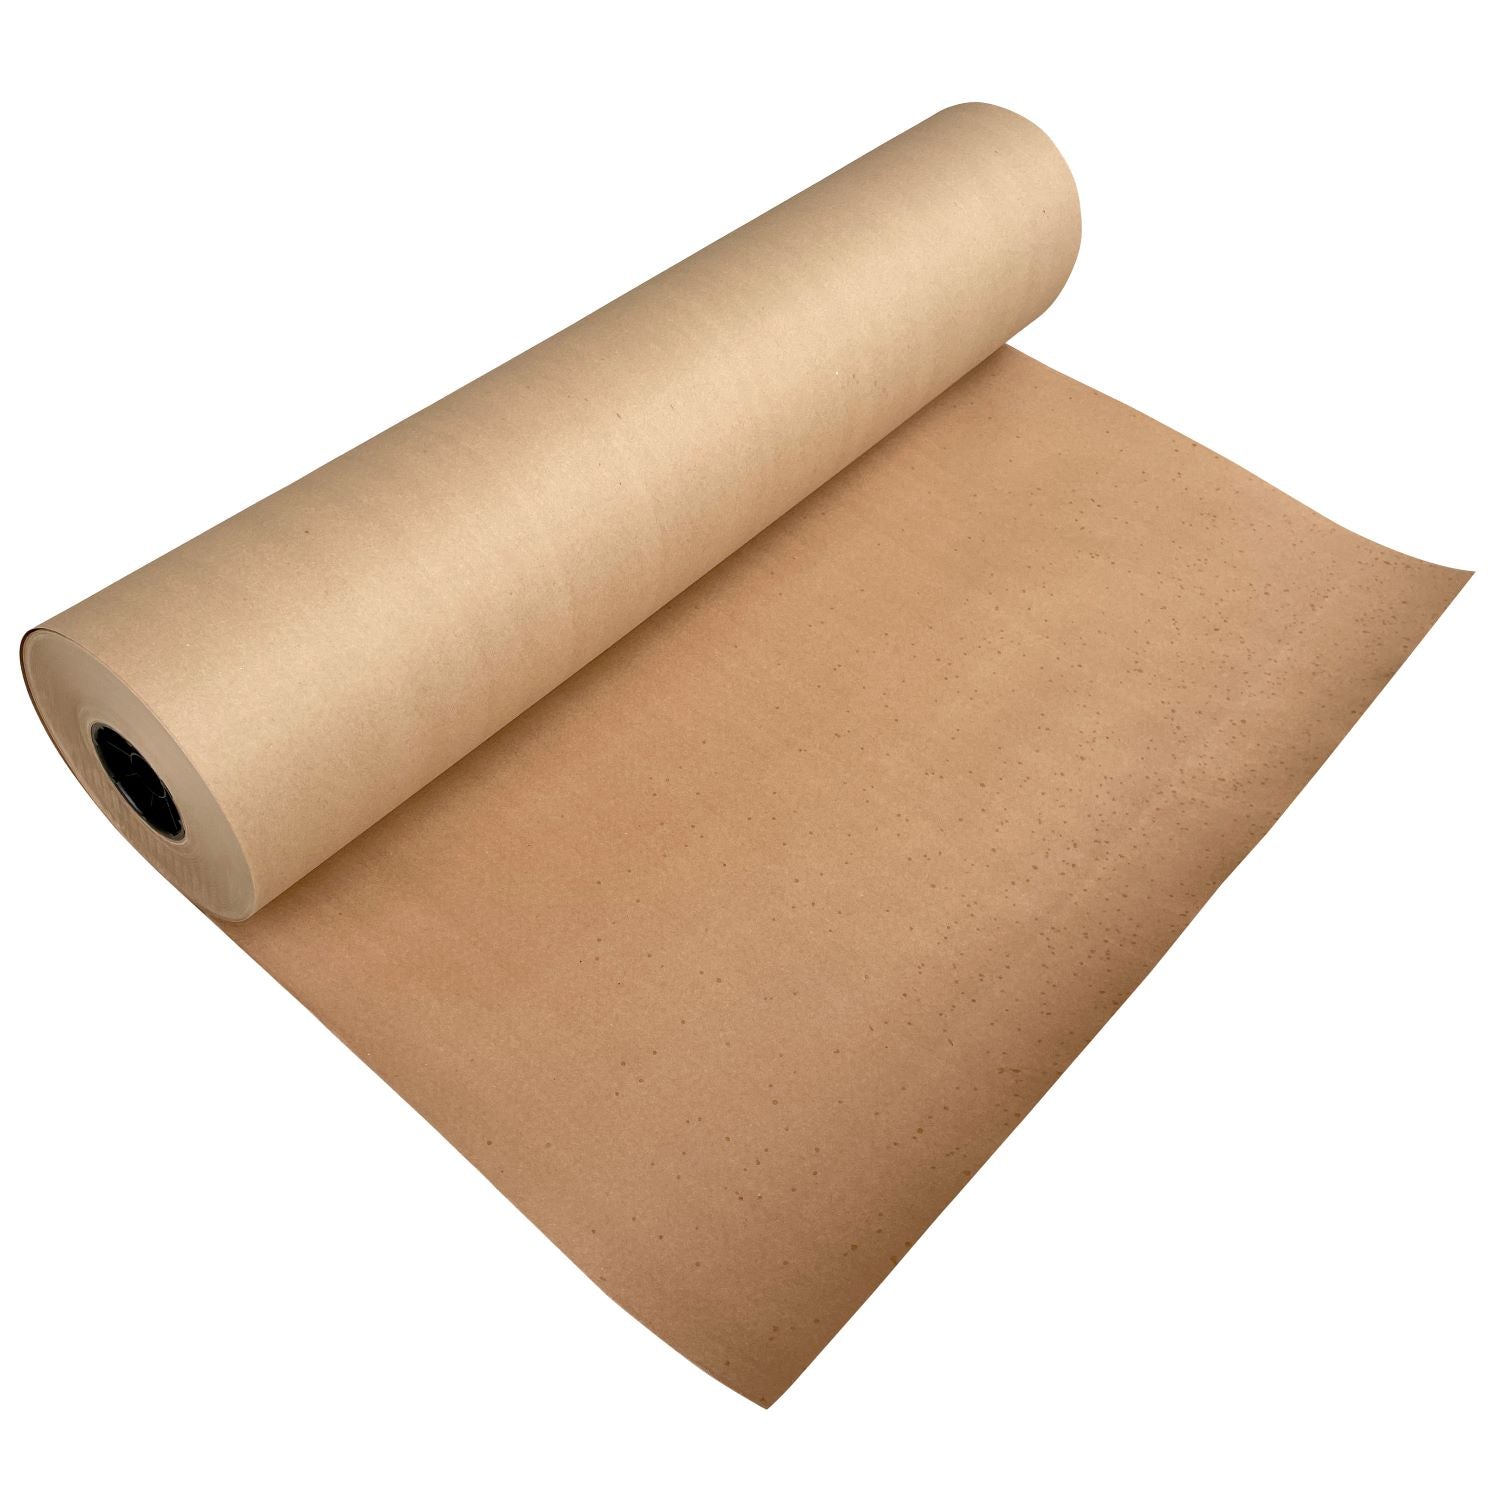 Heavy Duty Builders Paper Roll - 75 lb Construction Paper (Brown)